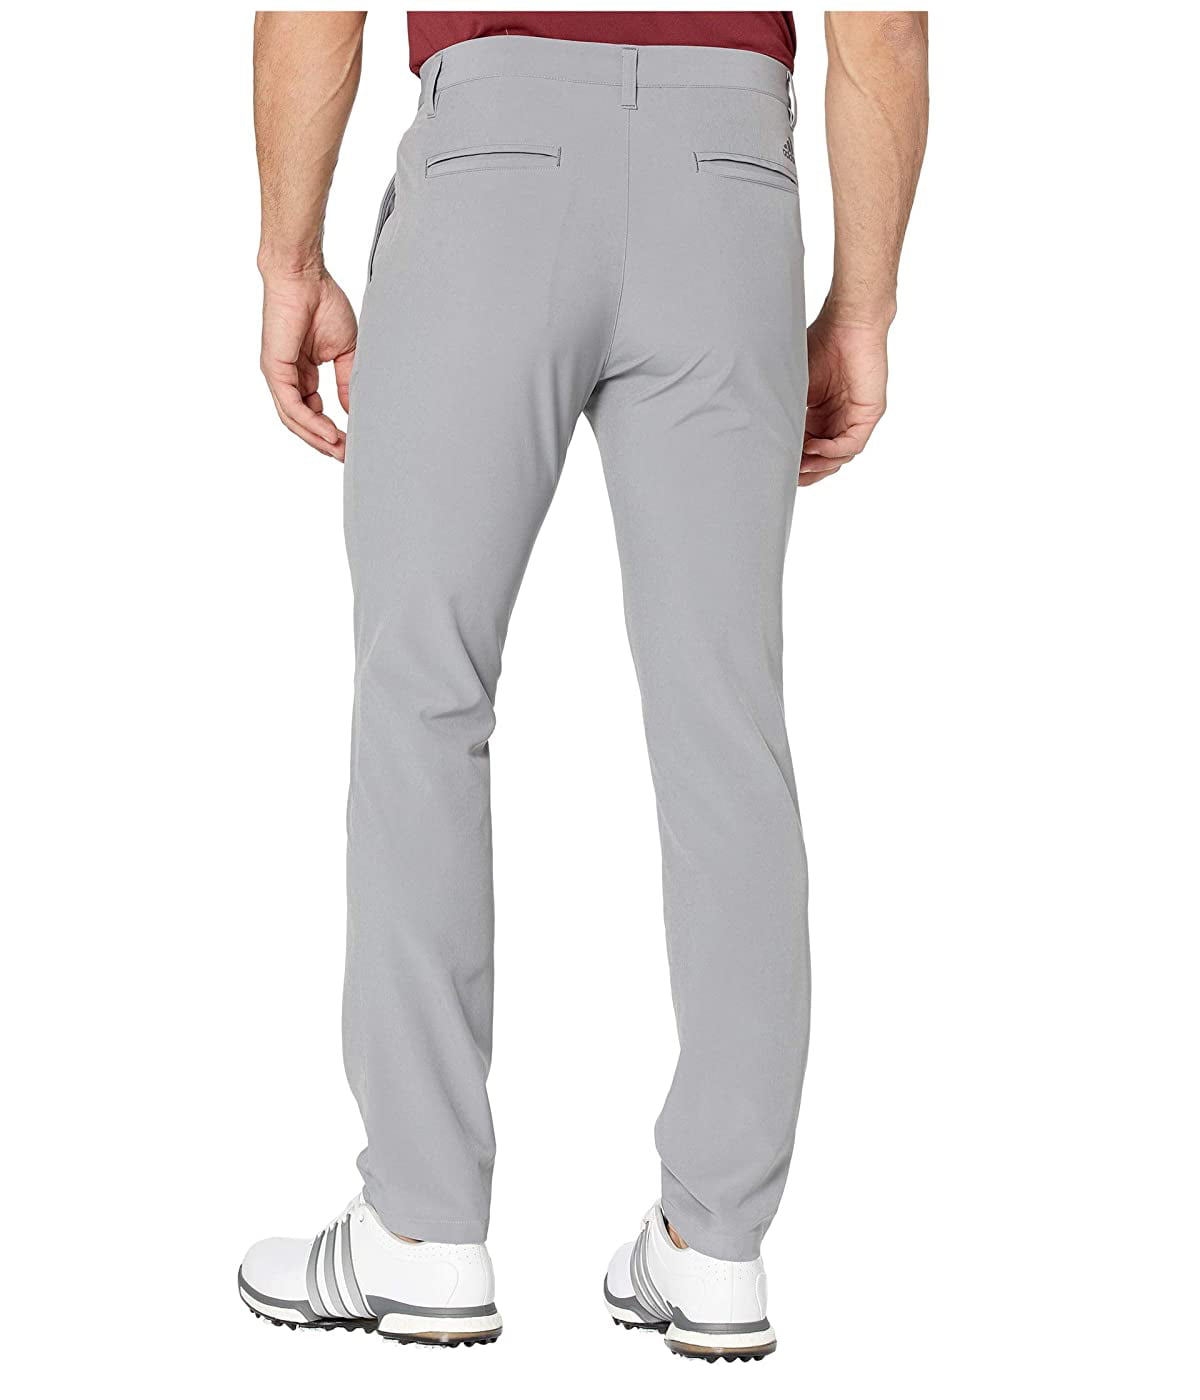 adidas tapered fit golf pants